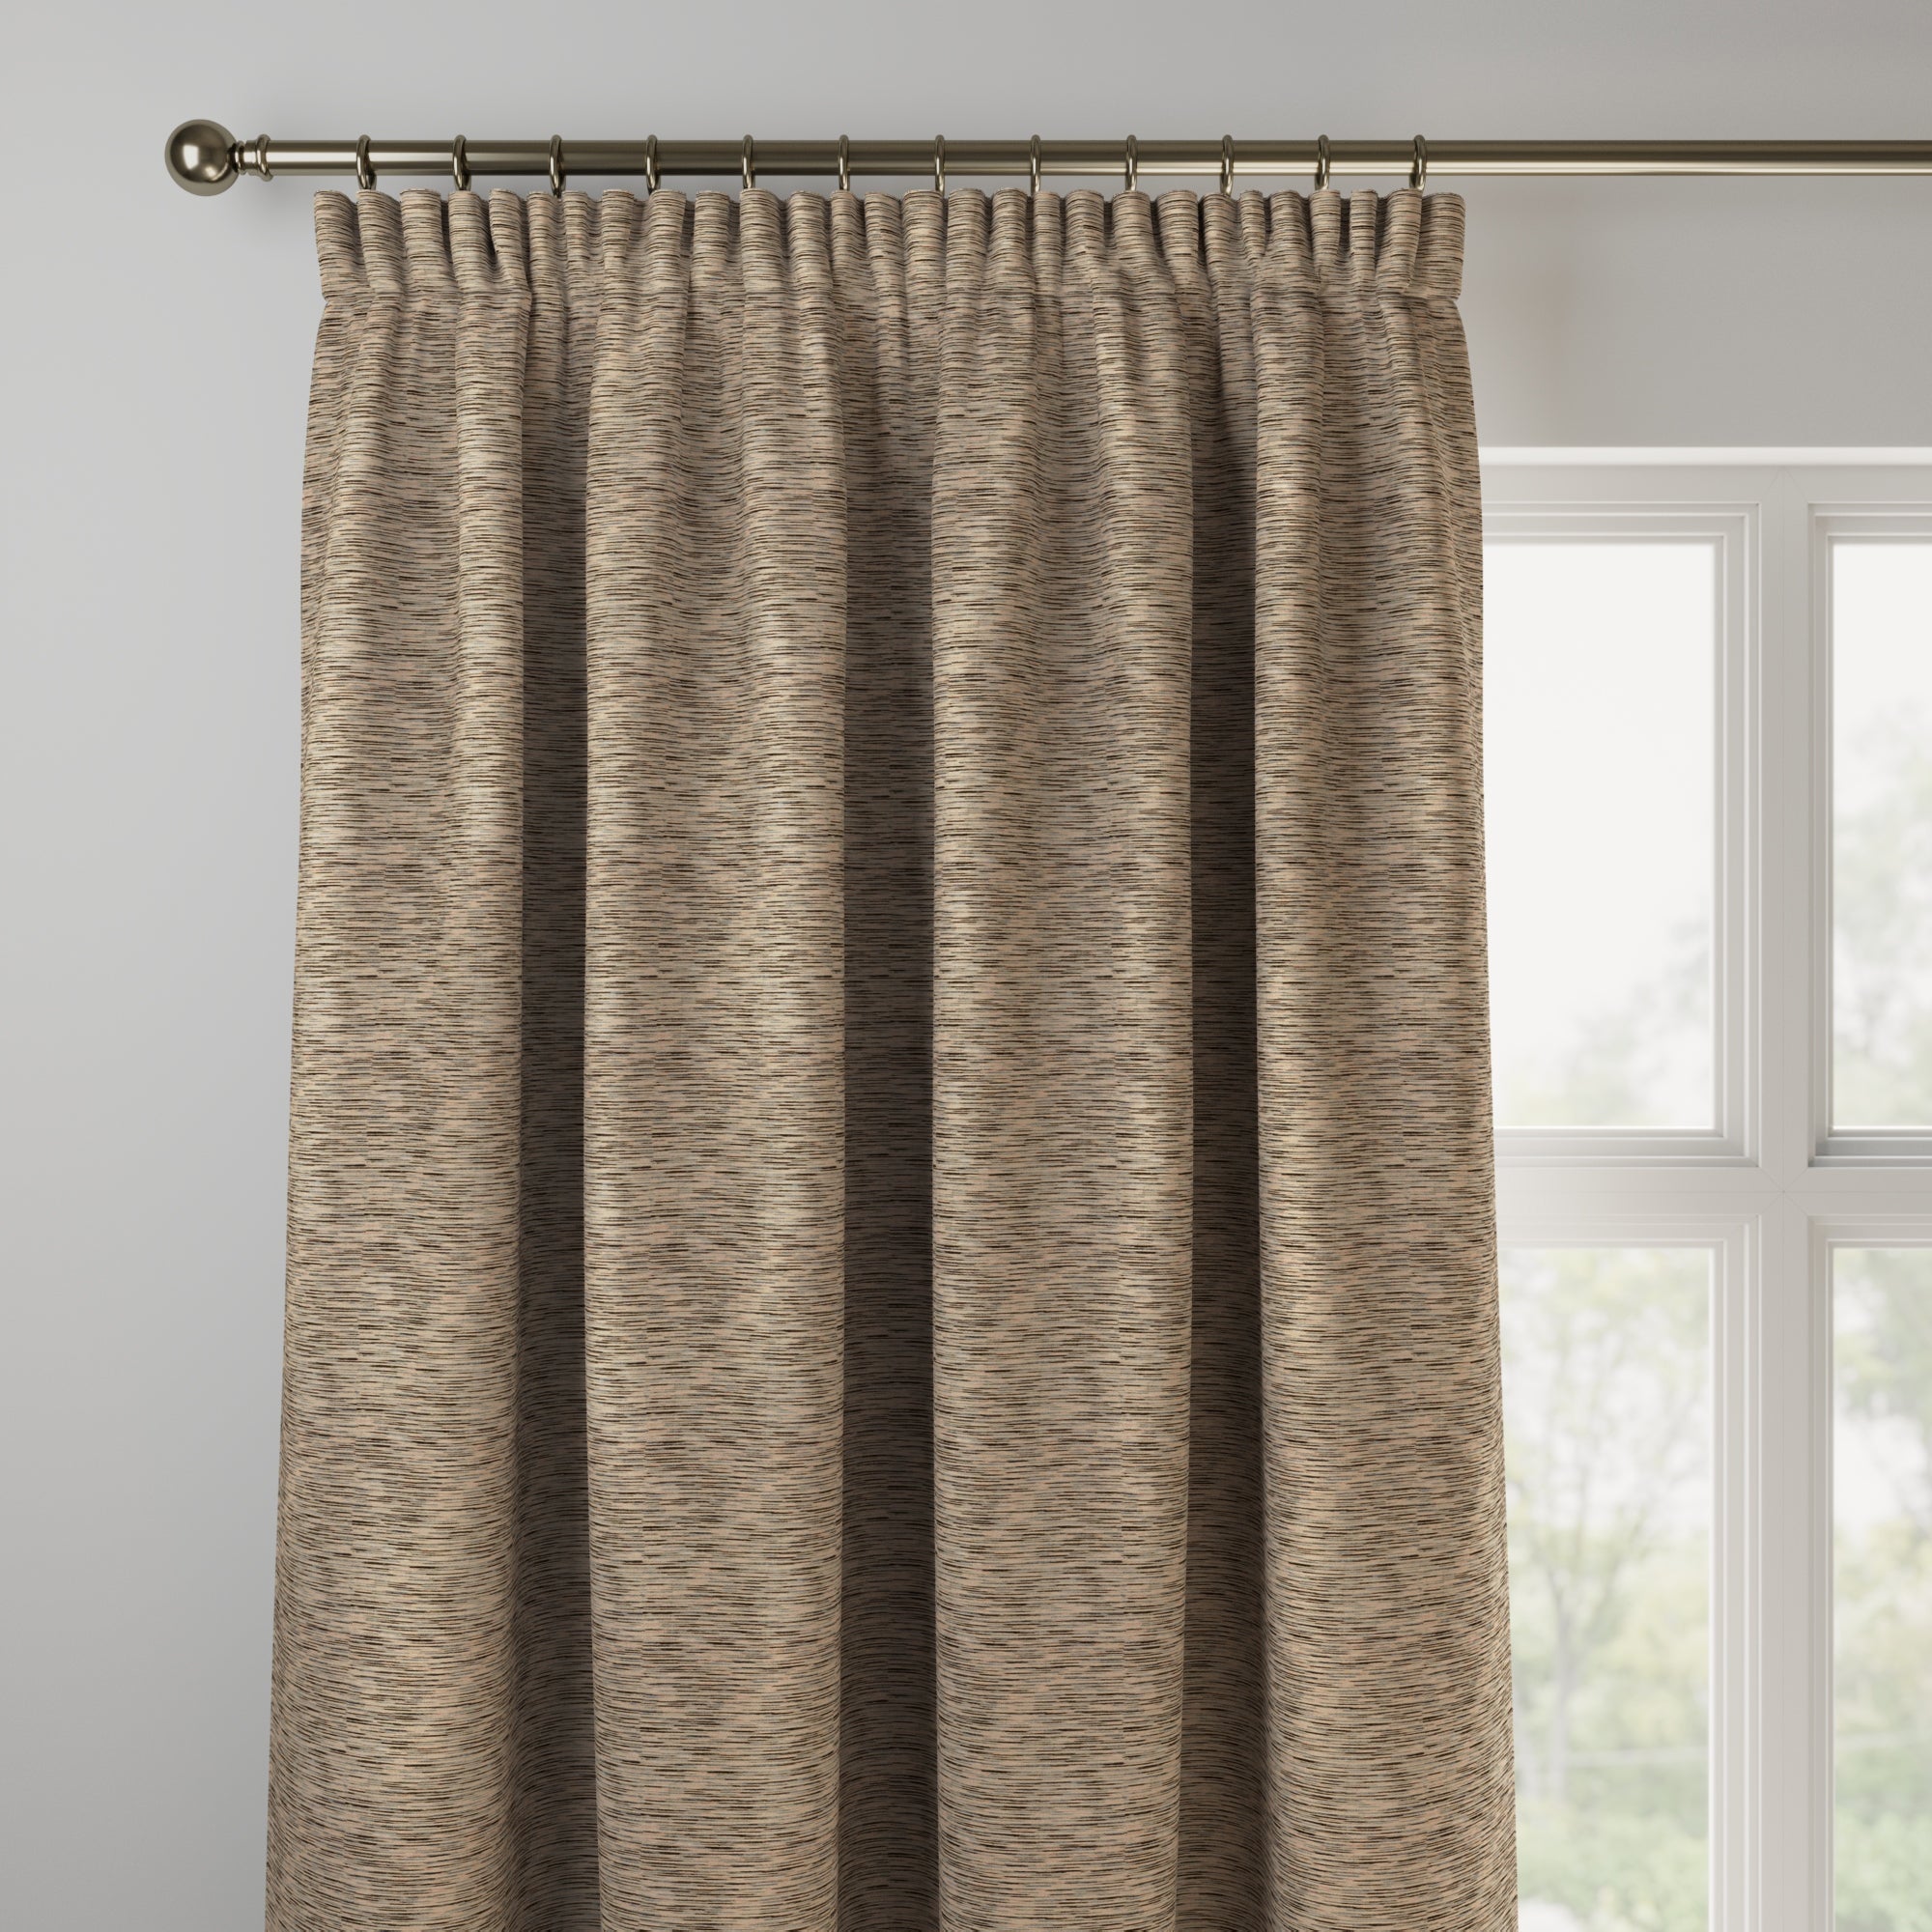 Nepal Made to Measure Curtains | Dunelm